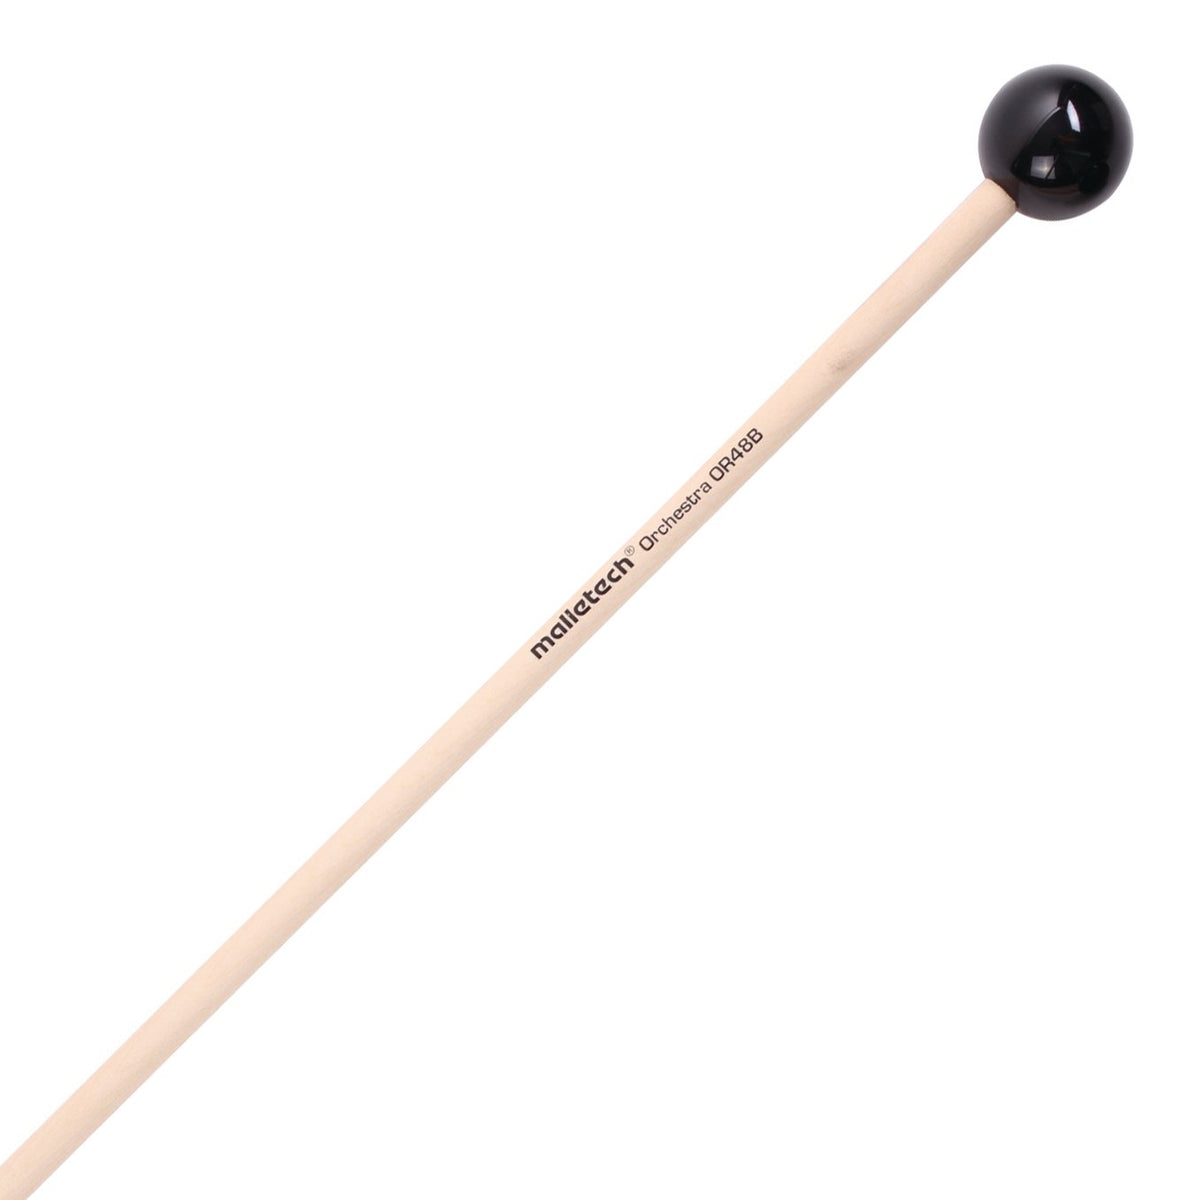 Malletech - New Orchestral Series Xylophone Mallets